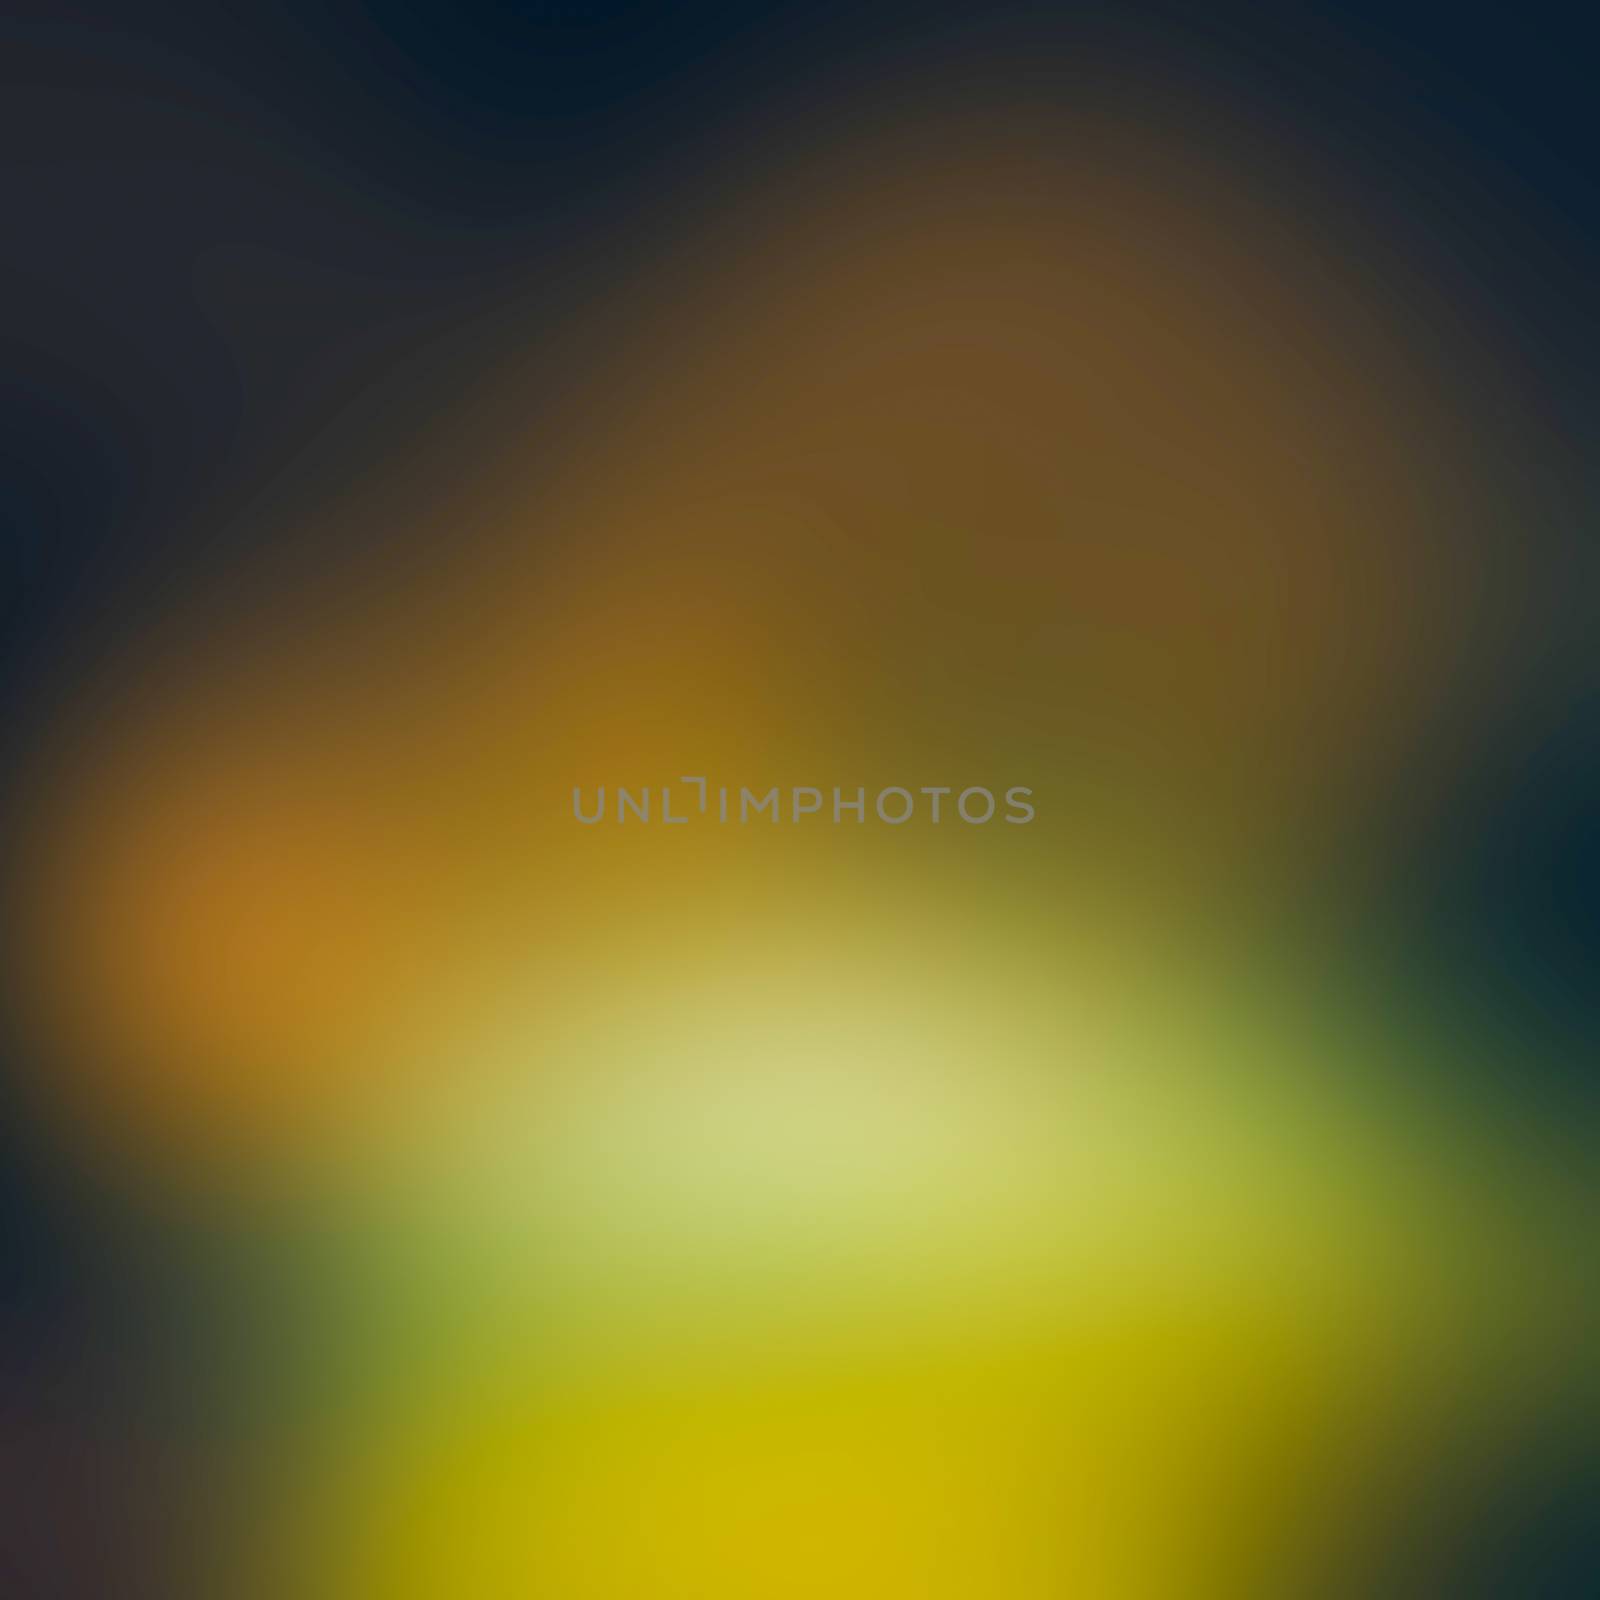 Yellow brown abstract blurred background by sengnsp